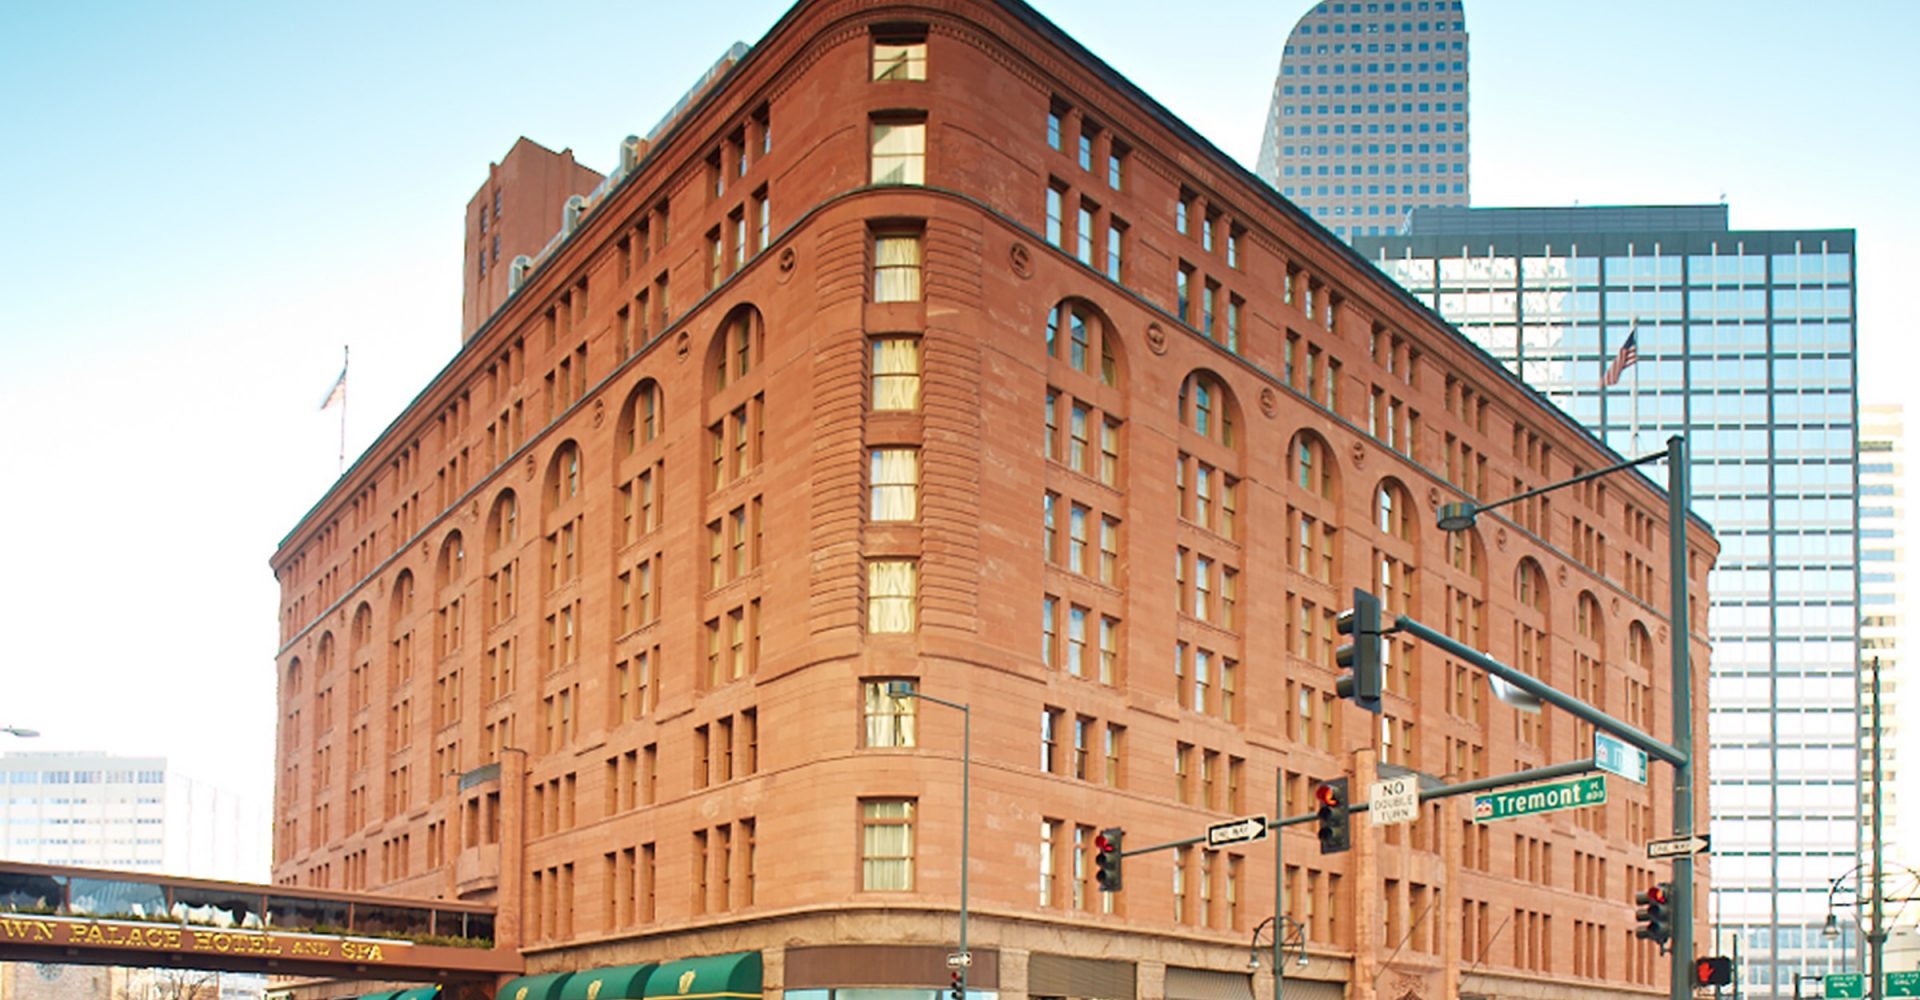 The Brown Palace in Downtown Denver, CO was opened in 1892. (photo: www.brownpalace.com)